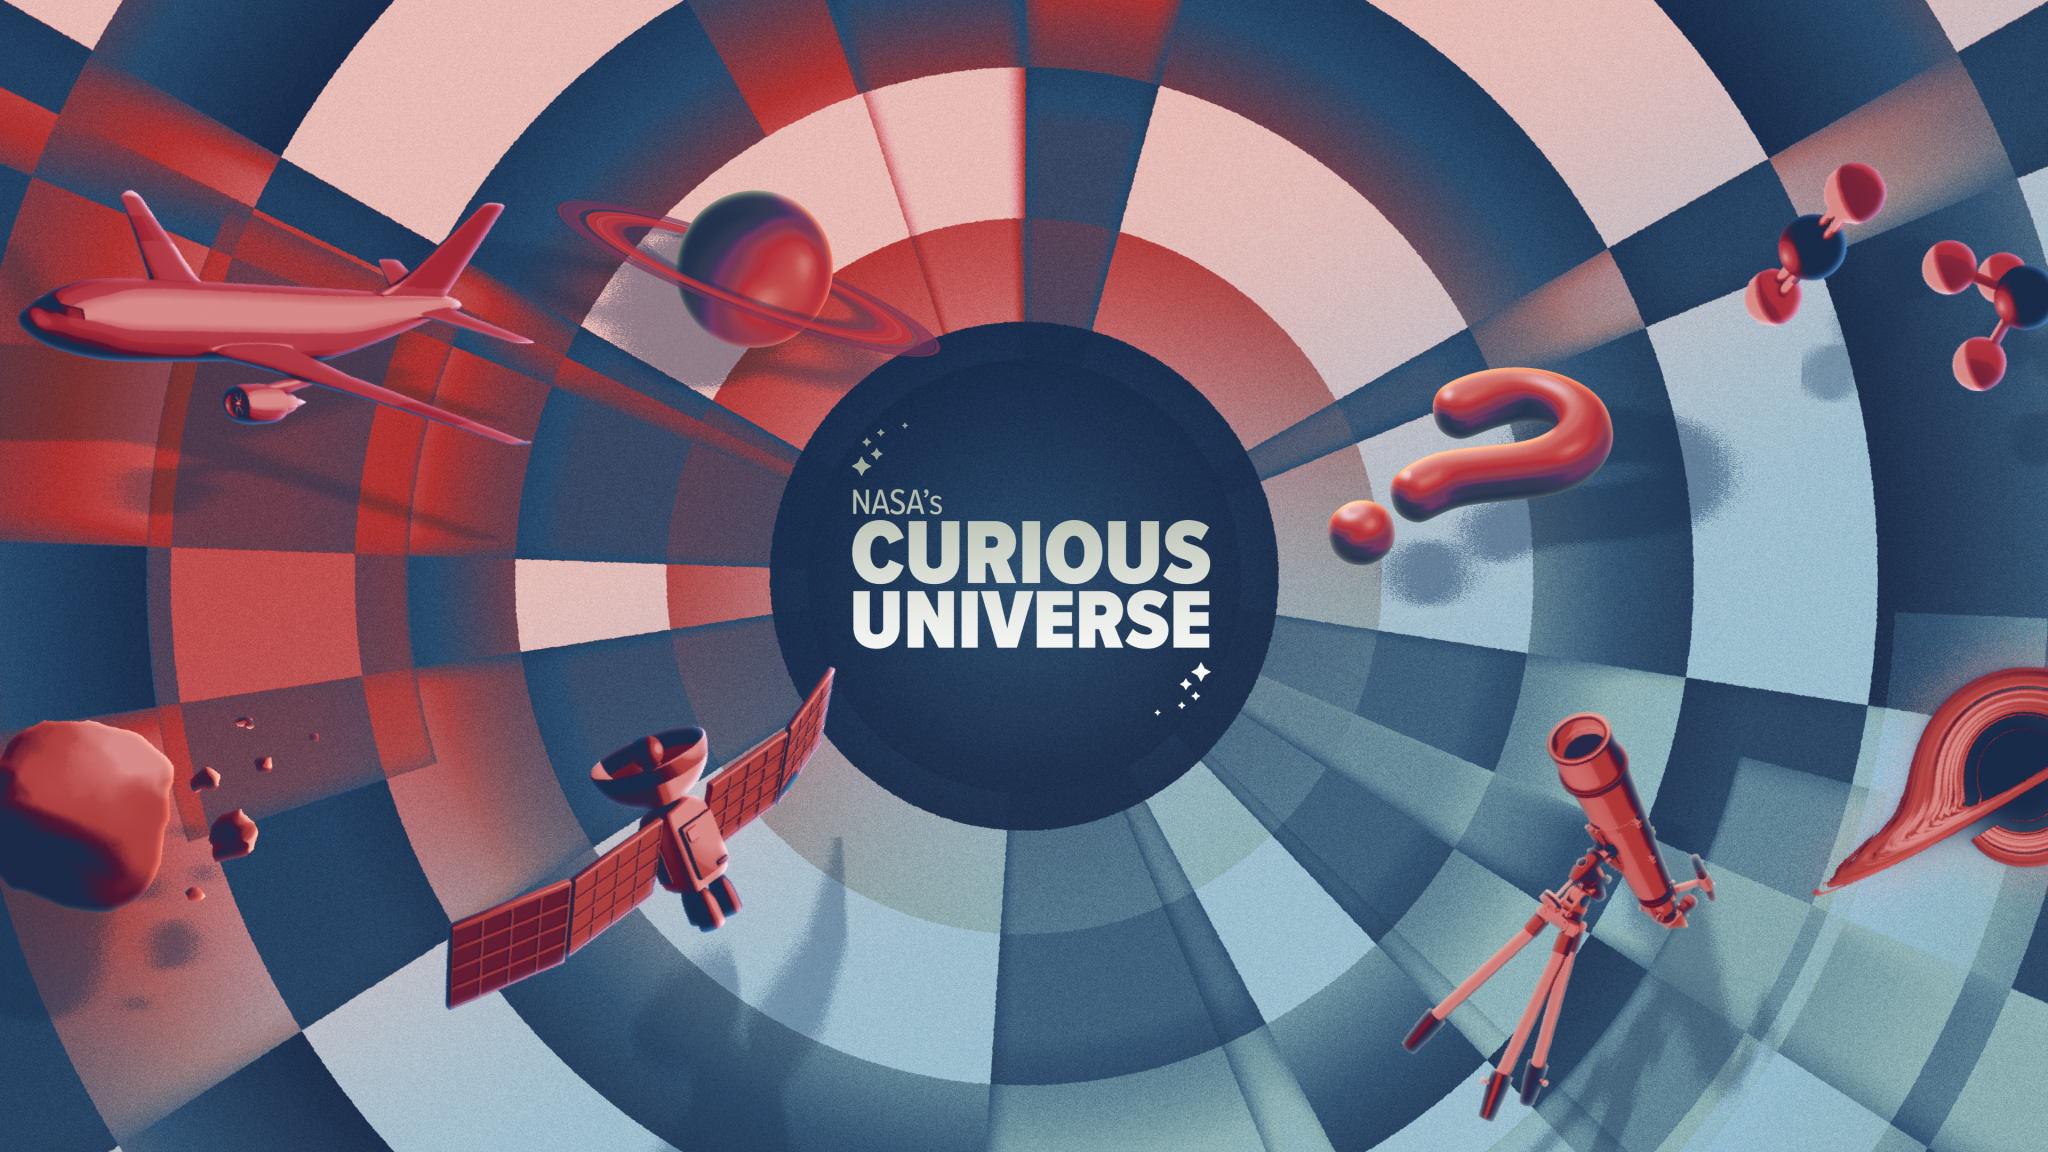 This image shows a navy blue circle with a logo in the center that reads “NASA’s Curious Universe” in white letters with stars in the upper left and bottom right. Surrounding the circle, there are panels of shades of alternative reds and blues with red icons floating. The icons include a plane, planet Saturn, an asteroid with smaller rocks surrounding, a satellite, a question mark, a telescope, molecules, and part of a visualization of a black hole.